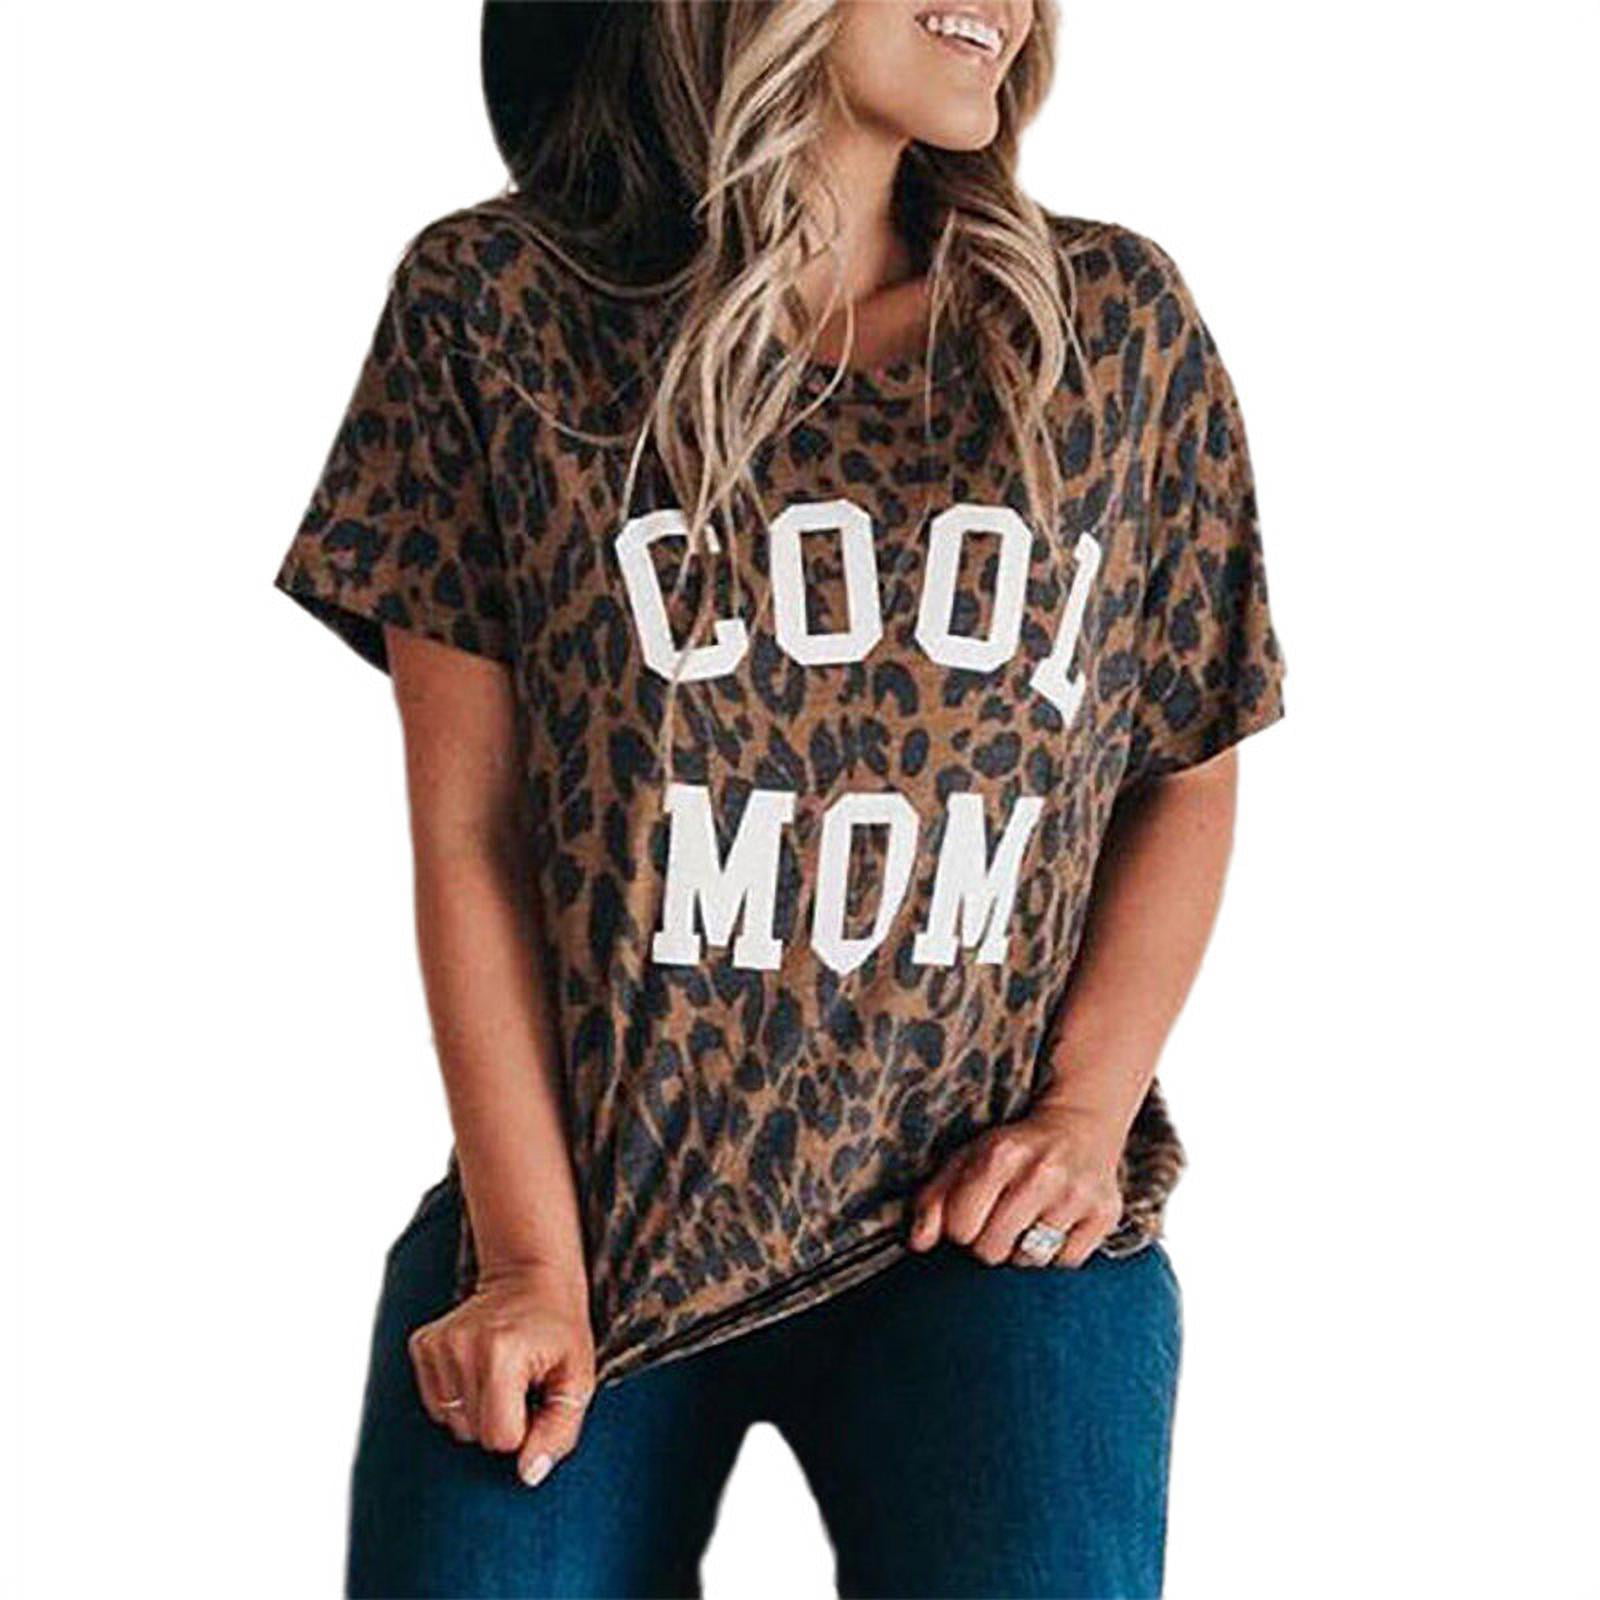 Amober Short Sleeve for Women,Womens Leopard Colorblock Striped Short Sleeve T-Shirt Round Neck Casual Top